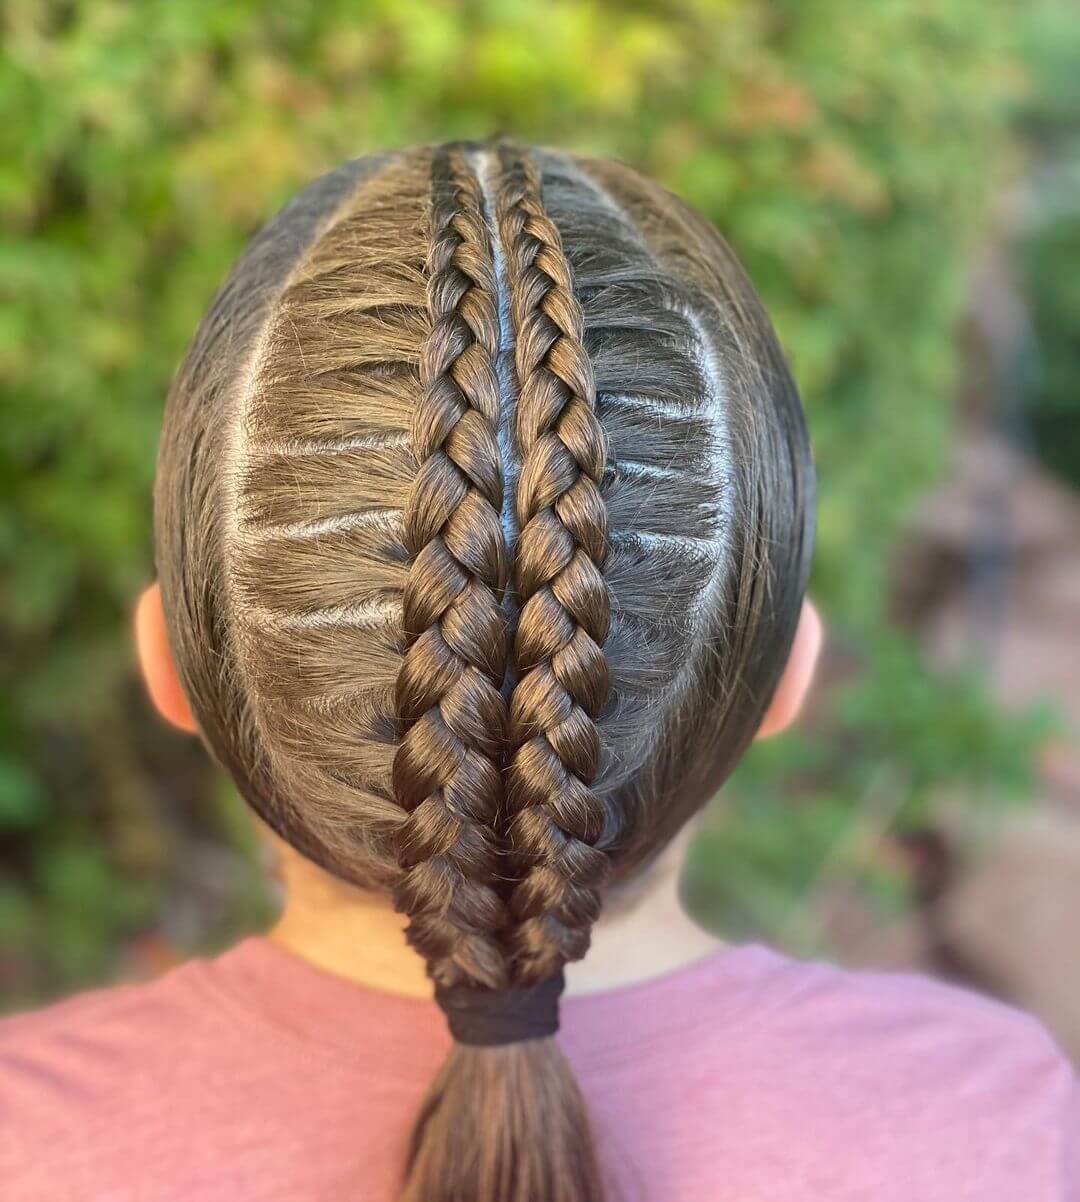 Parallel knotted braids for kids